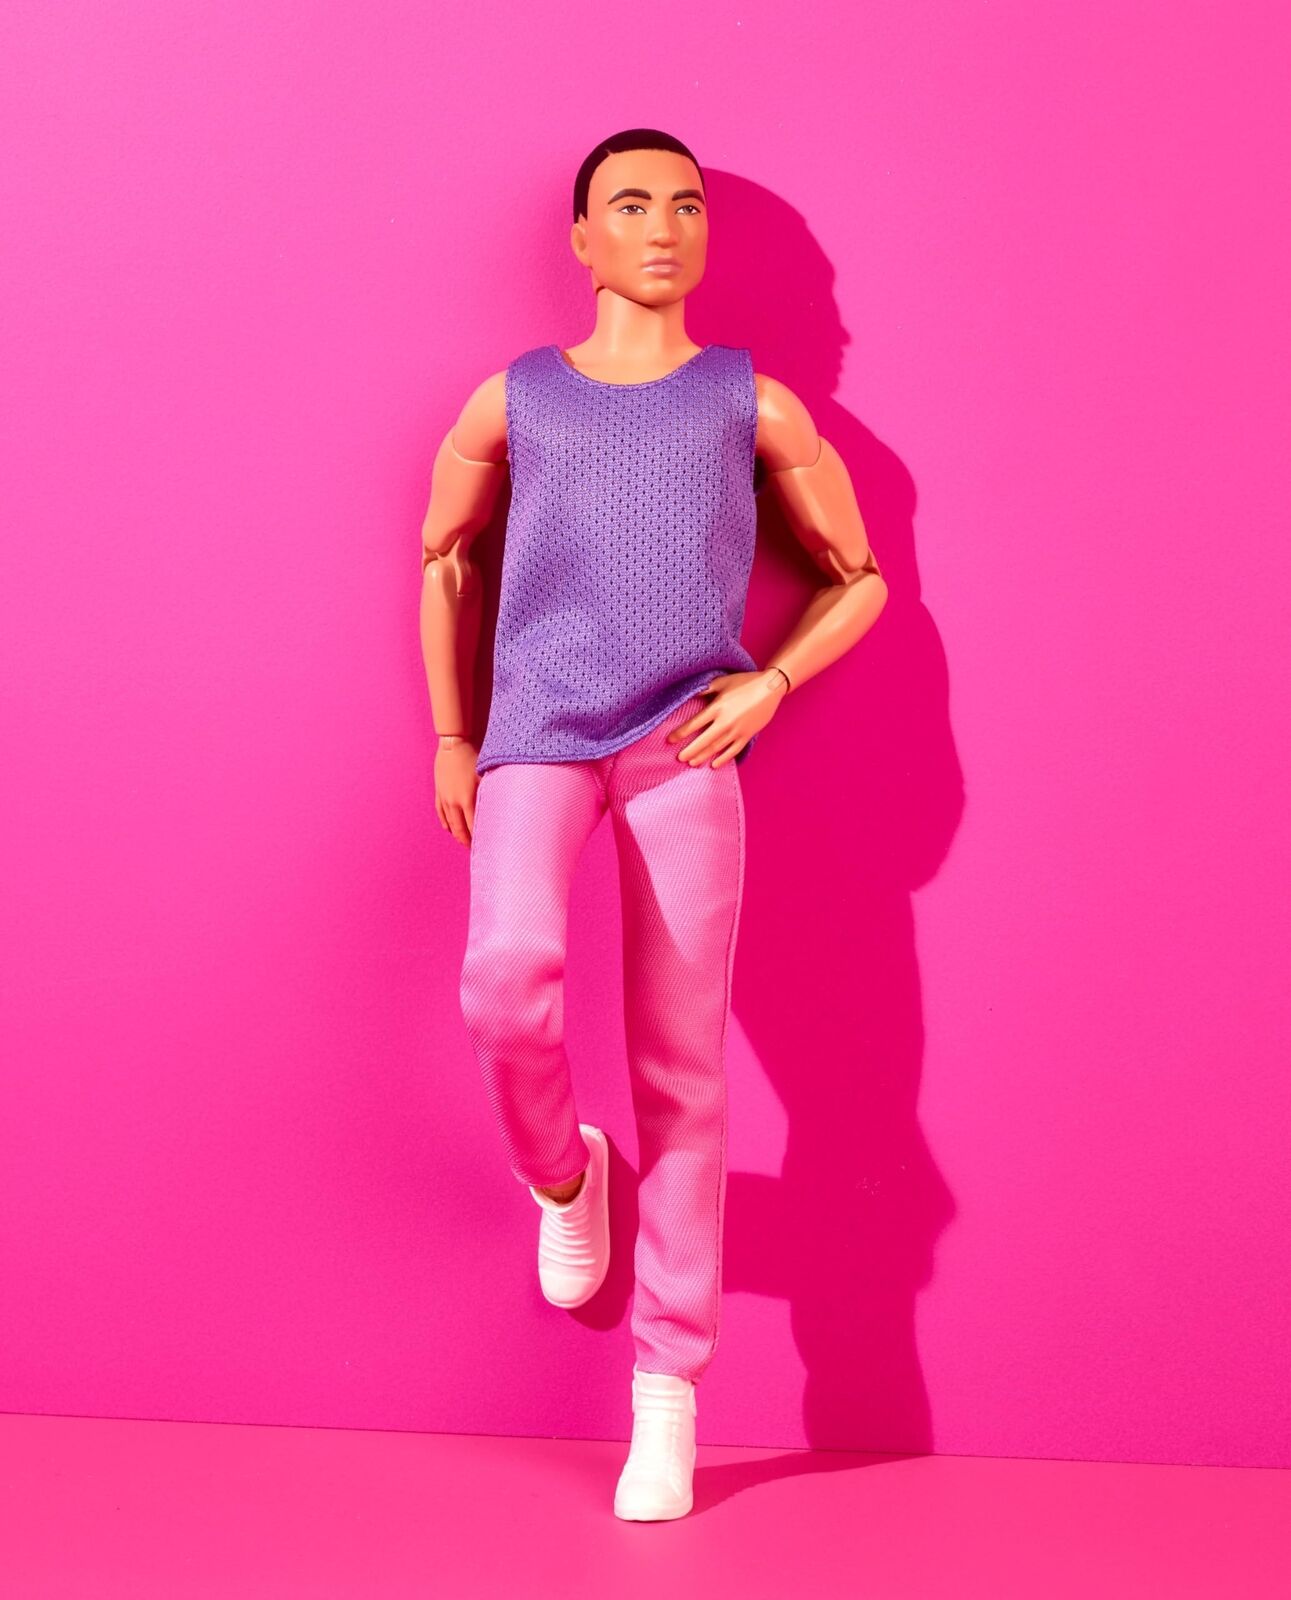 Barbie Looks Ken Doll with Black Hair Dressed in Purple Mesh Top and Pink Trouse